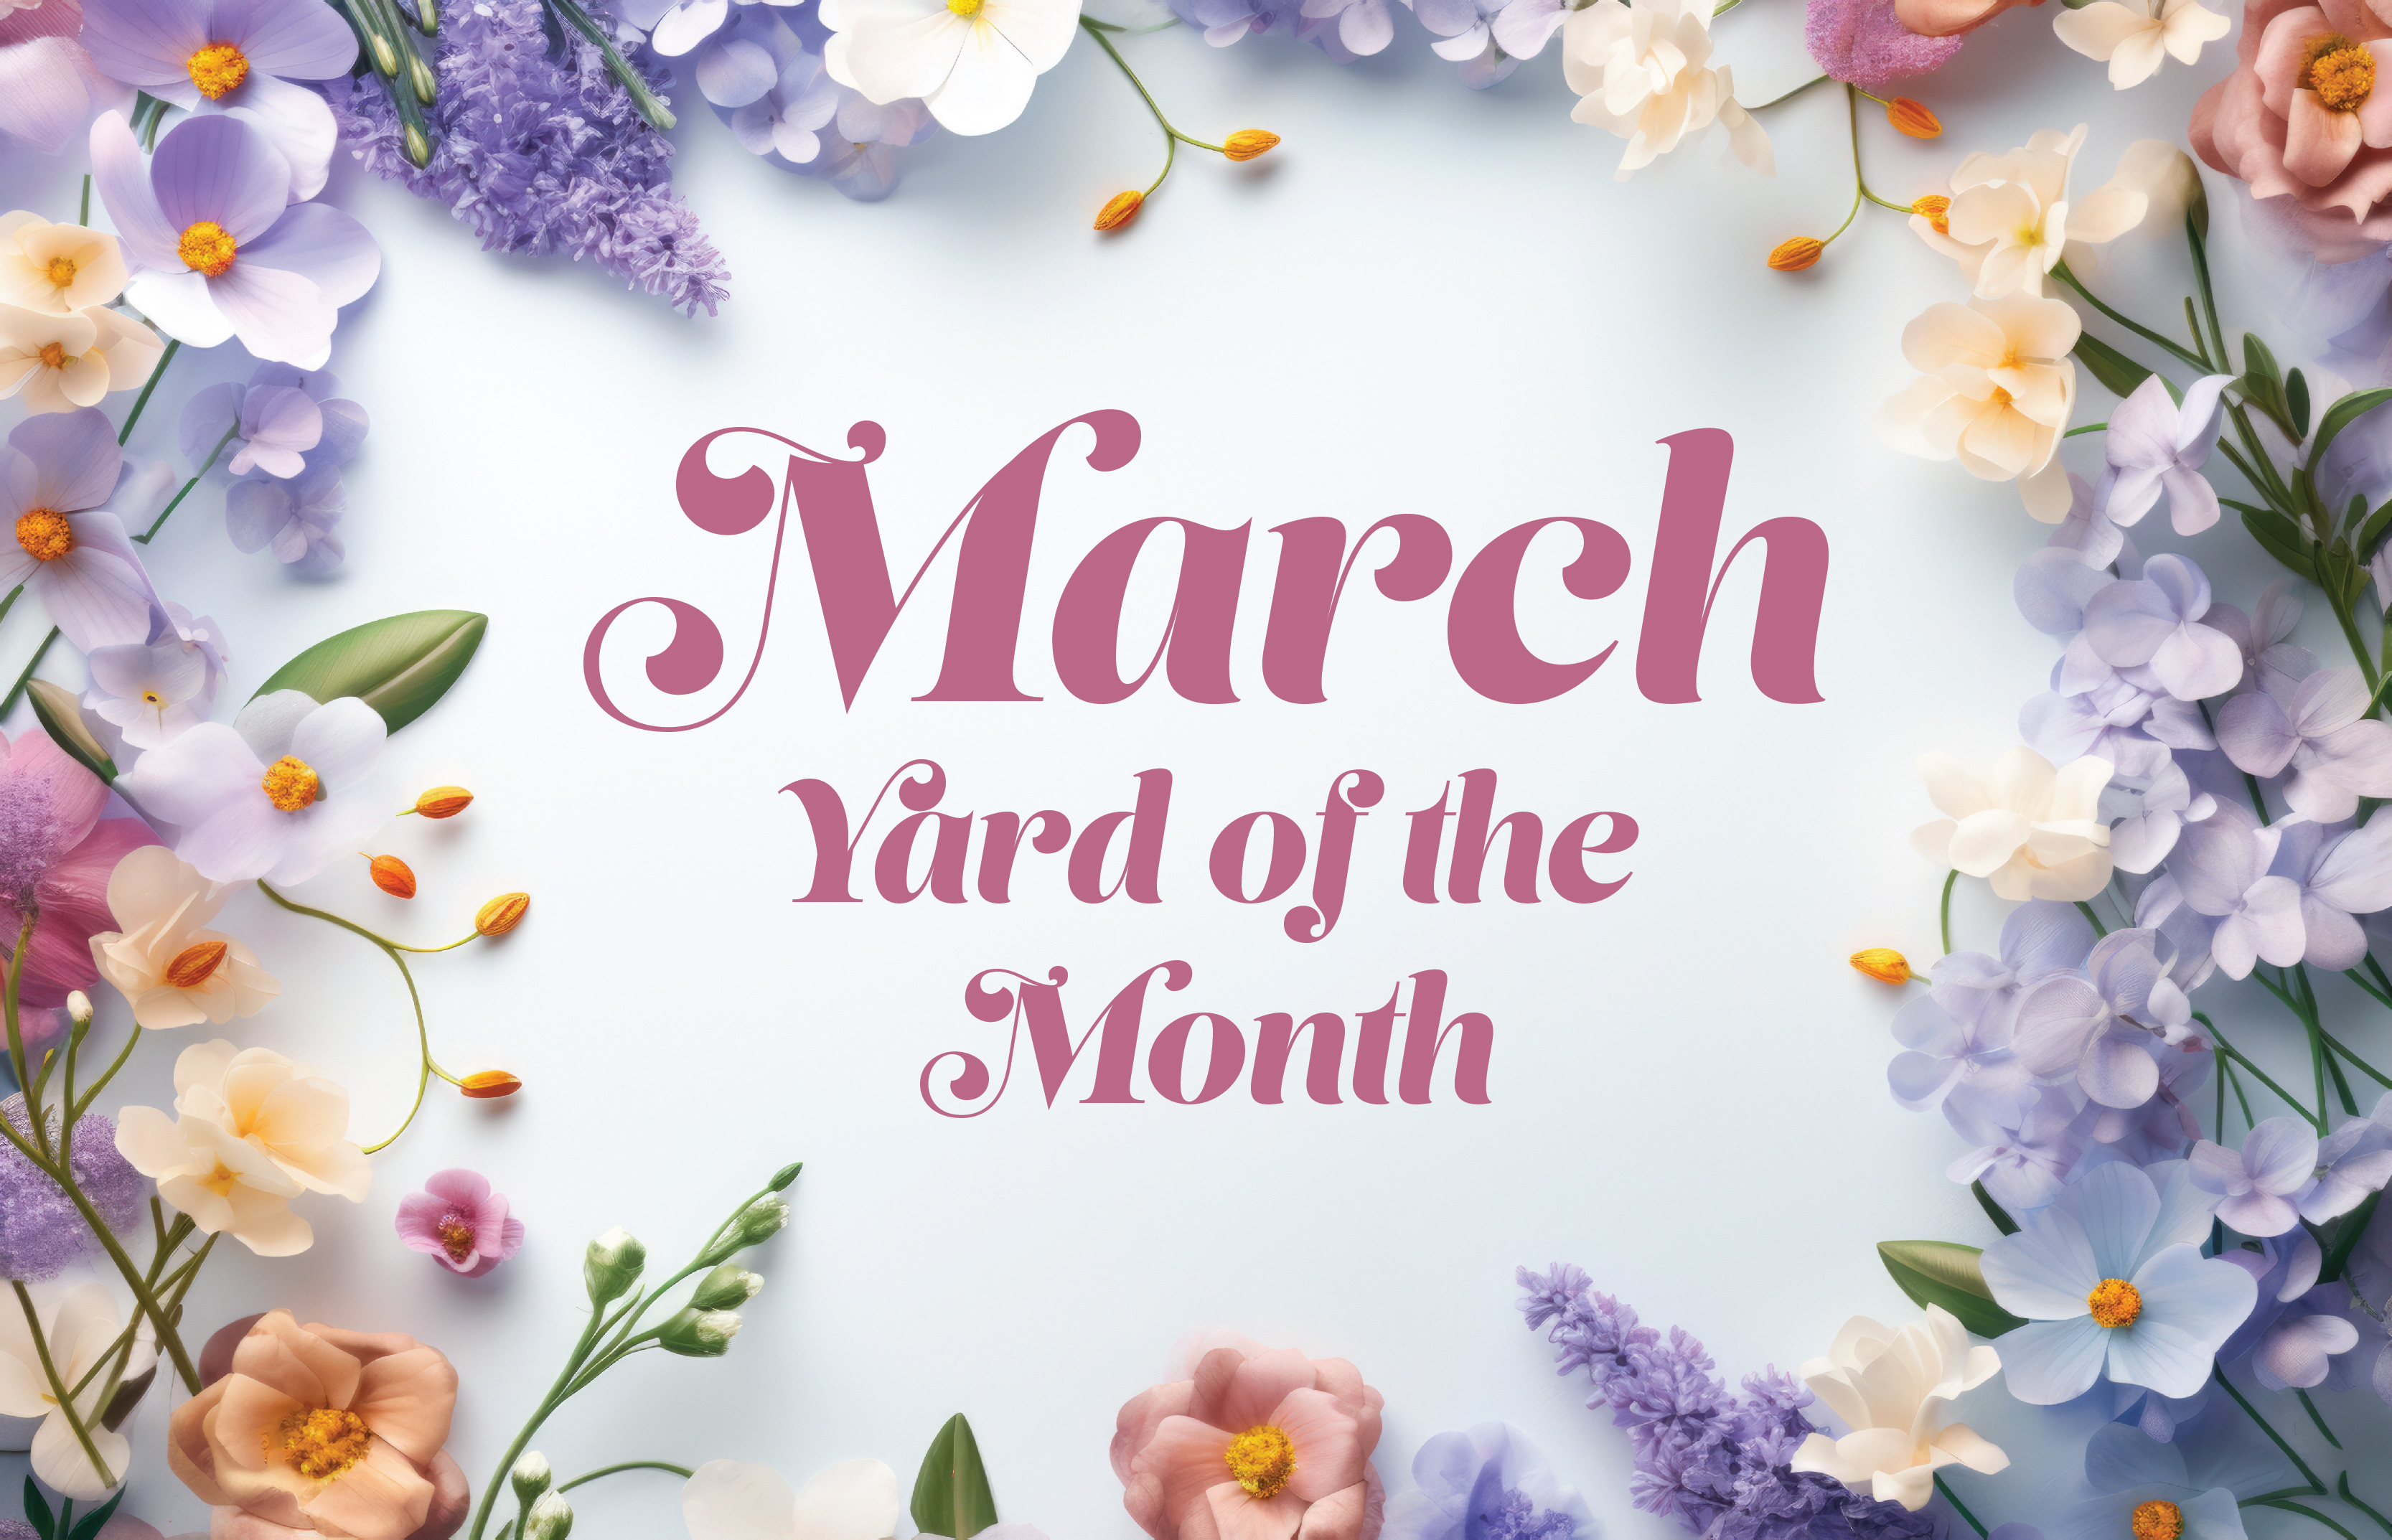 Hearthstone March Yard of the Month Winner